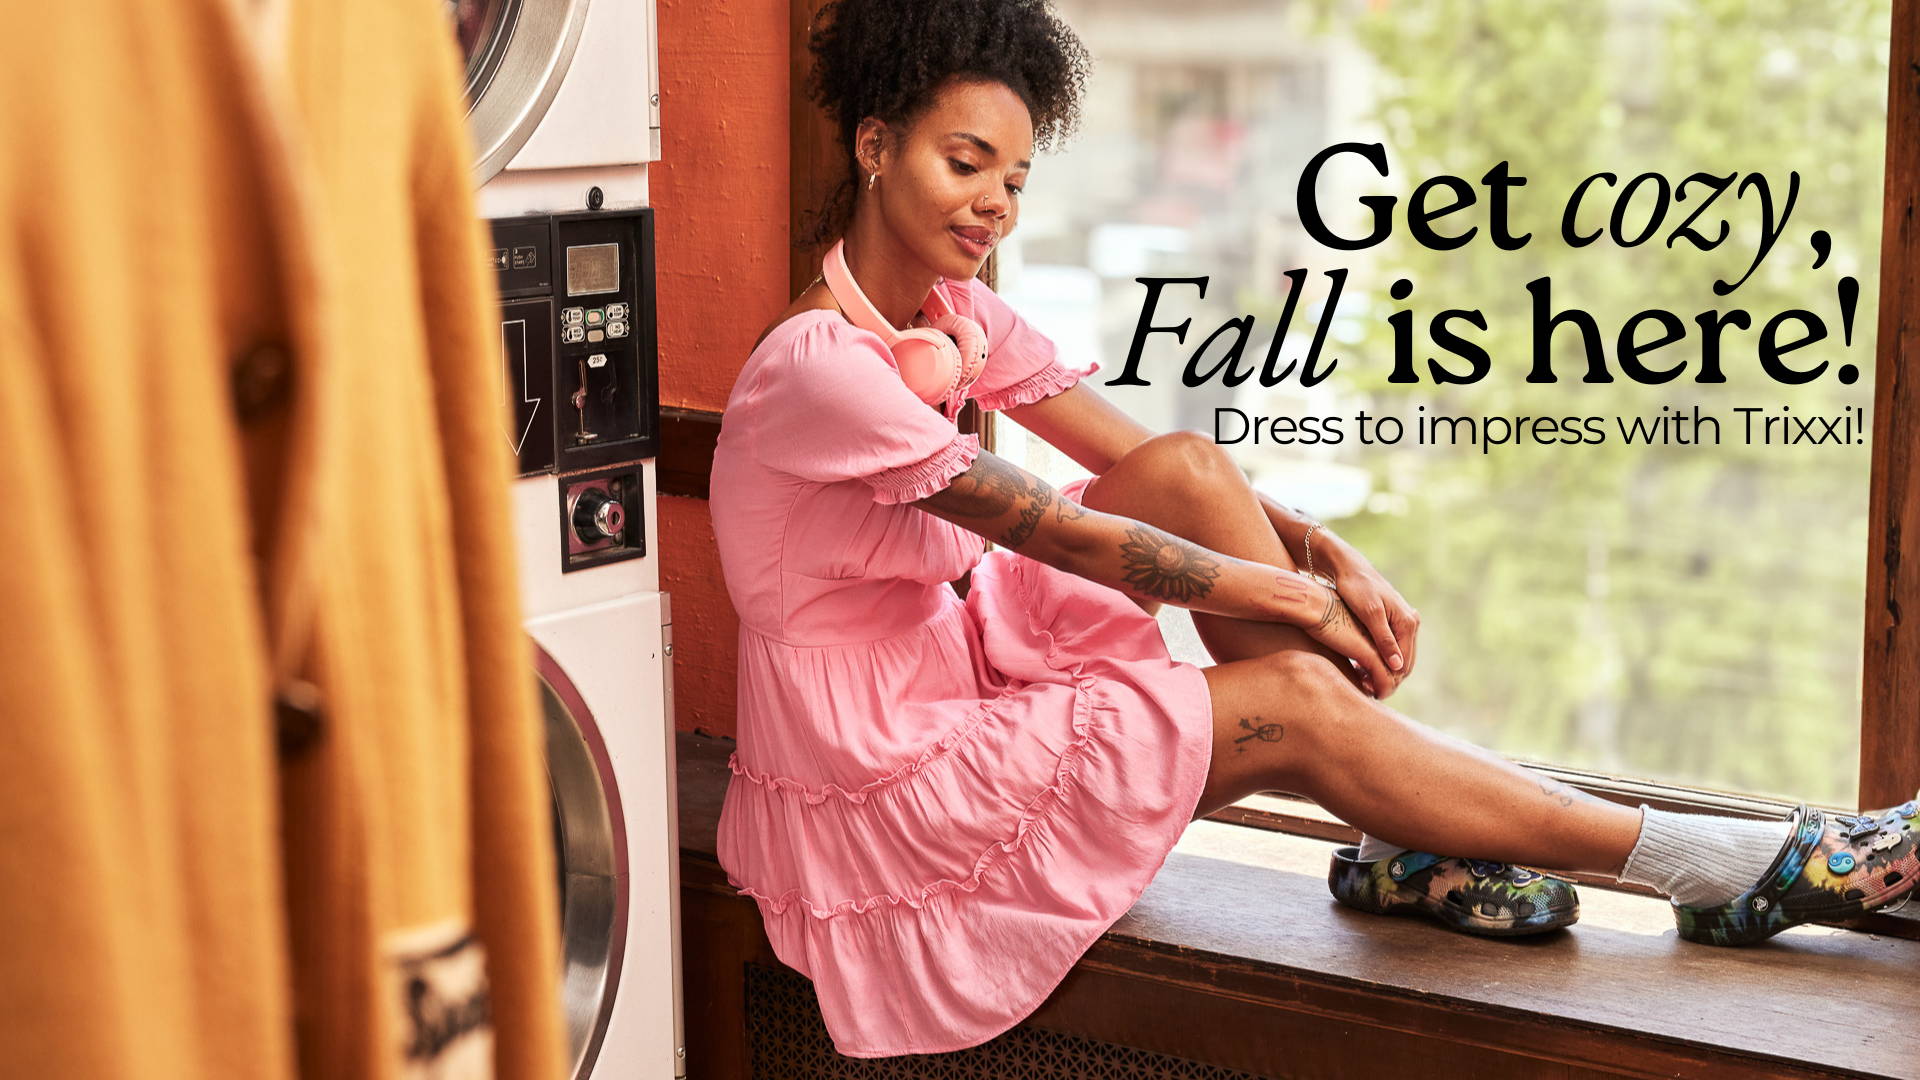 Get Cozy, Fall is here, dress to impress with Trixxi- girl in laundromat in barbie pink tier ruffle mini dress.